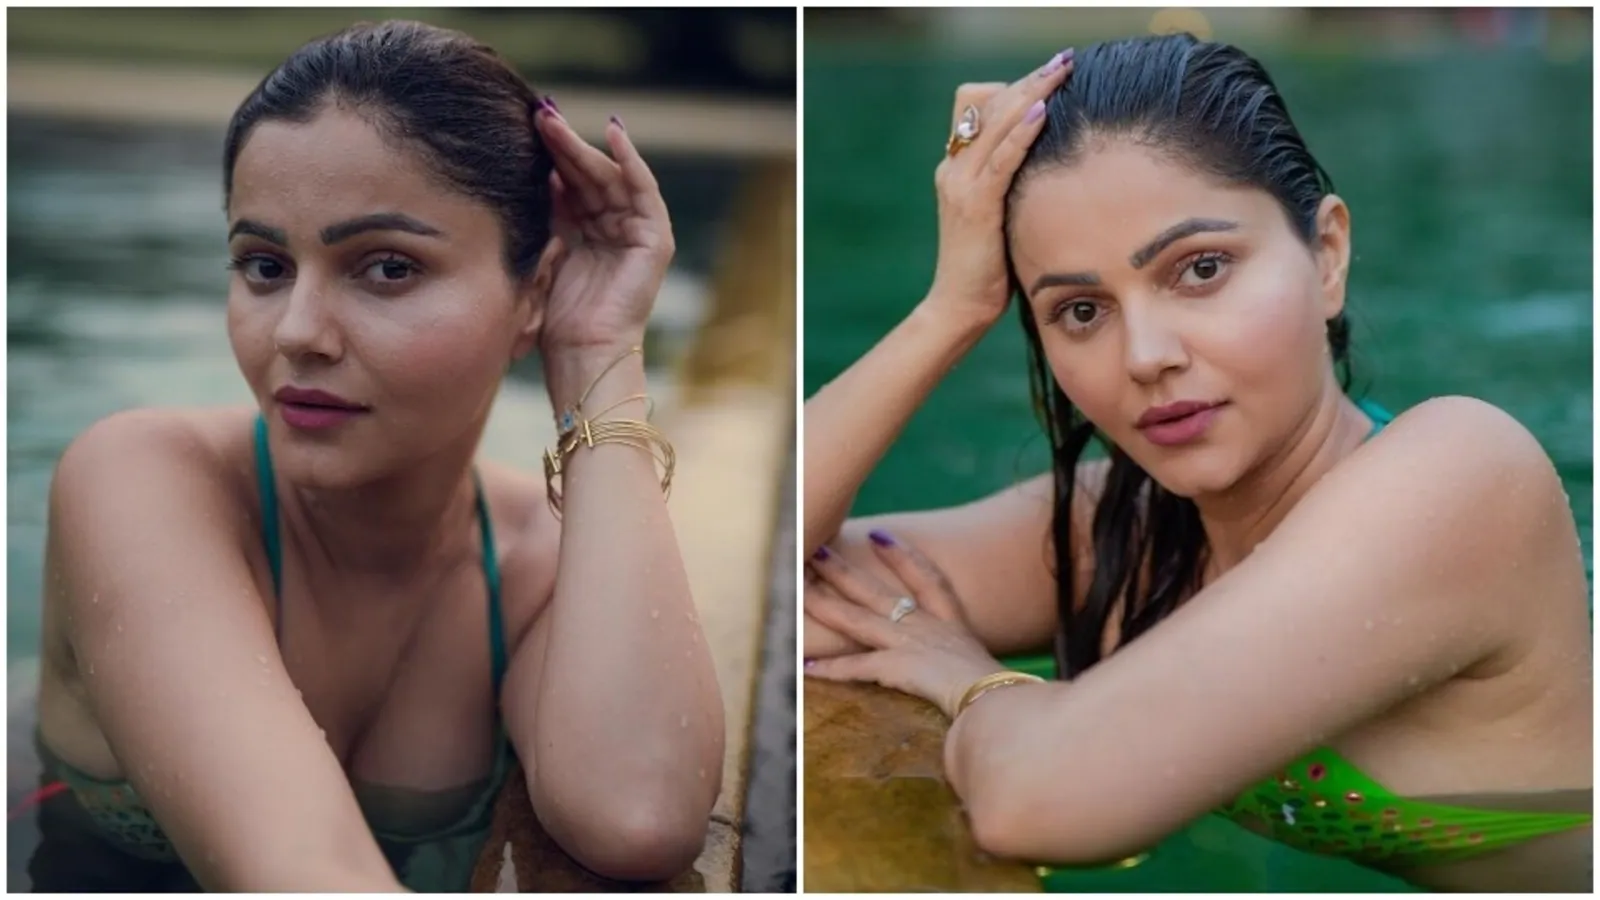 Rubina Dilaik in colourful bikini set chills in the pool for sizzling photoshoot, fan says ‘hotness overload’: See pics